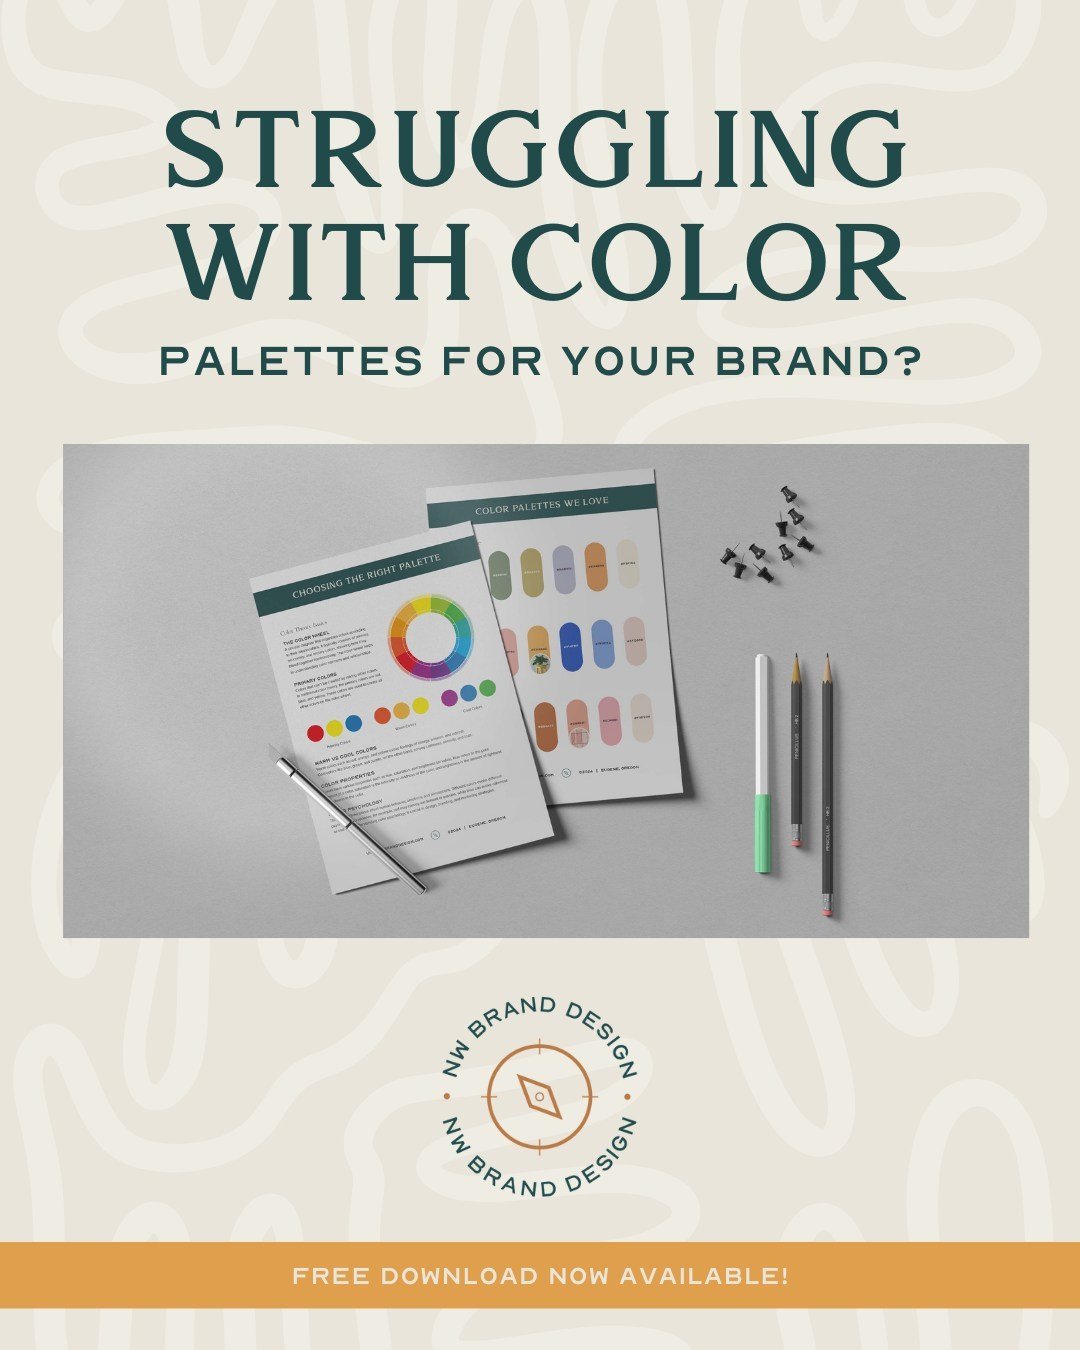 New FREE Download Available! ⁠
⁠
Need some inspo for your brand or a new branding project? How about some quick tips on color theory? Visit the link in our bio and download our FREE guide today! ⁠
⁠